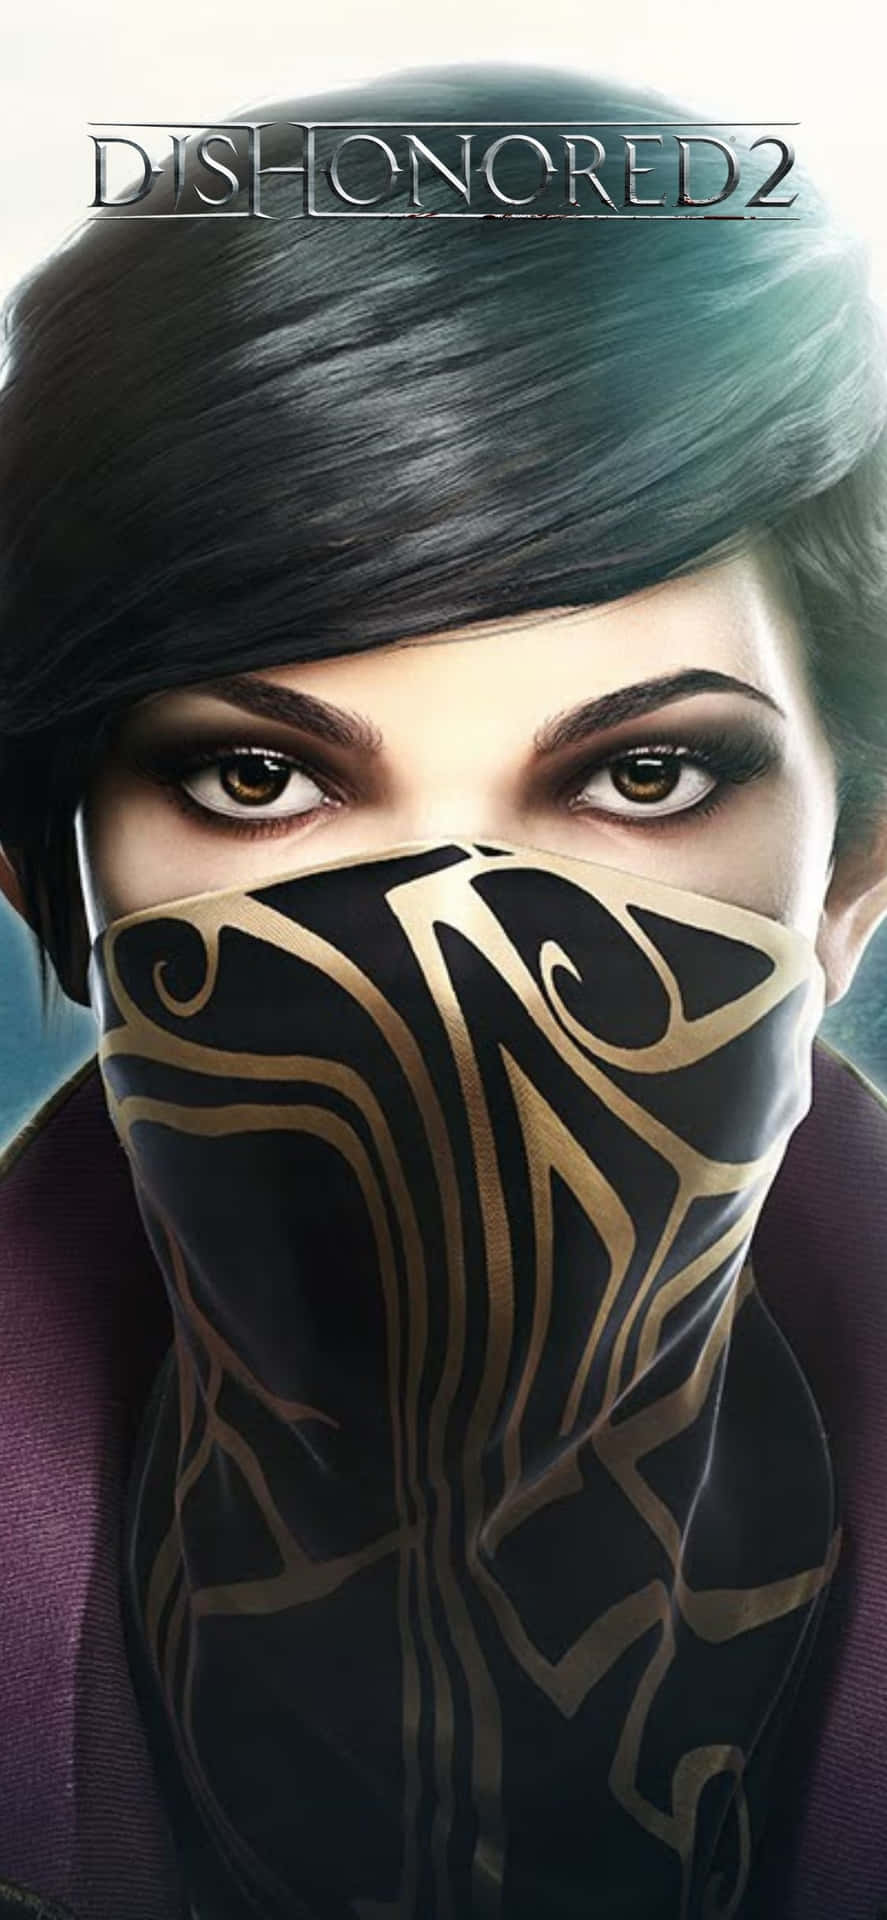 dishonored 2 pc - pc - pc - pc - pc - p